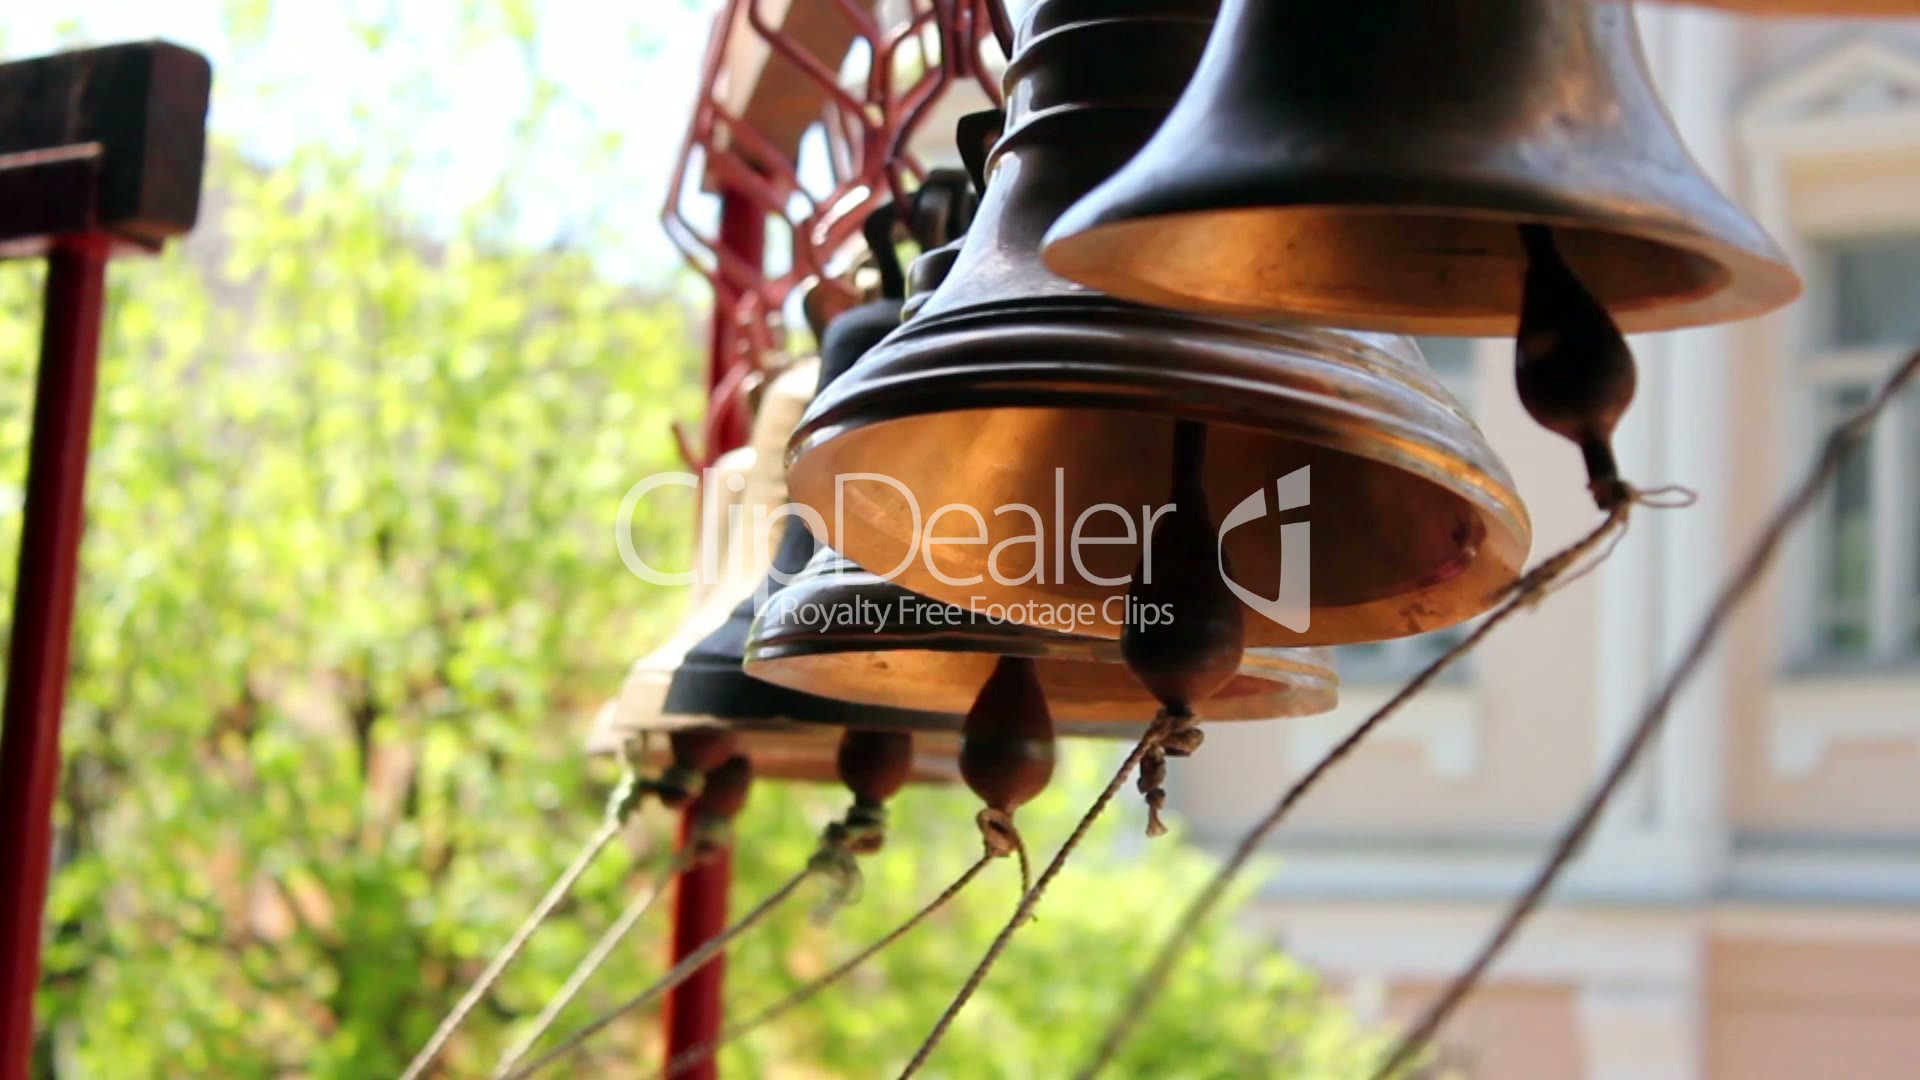 Church bells: Royalty-free video and stock footage